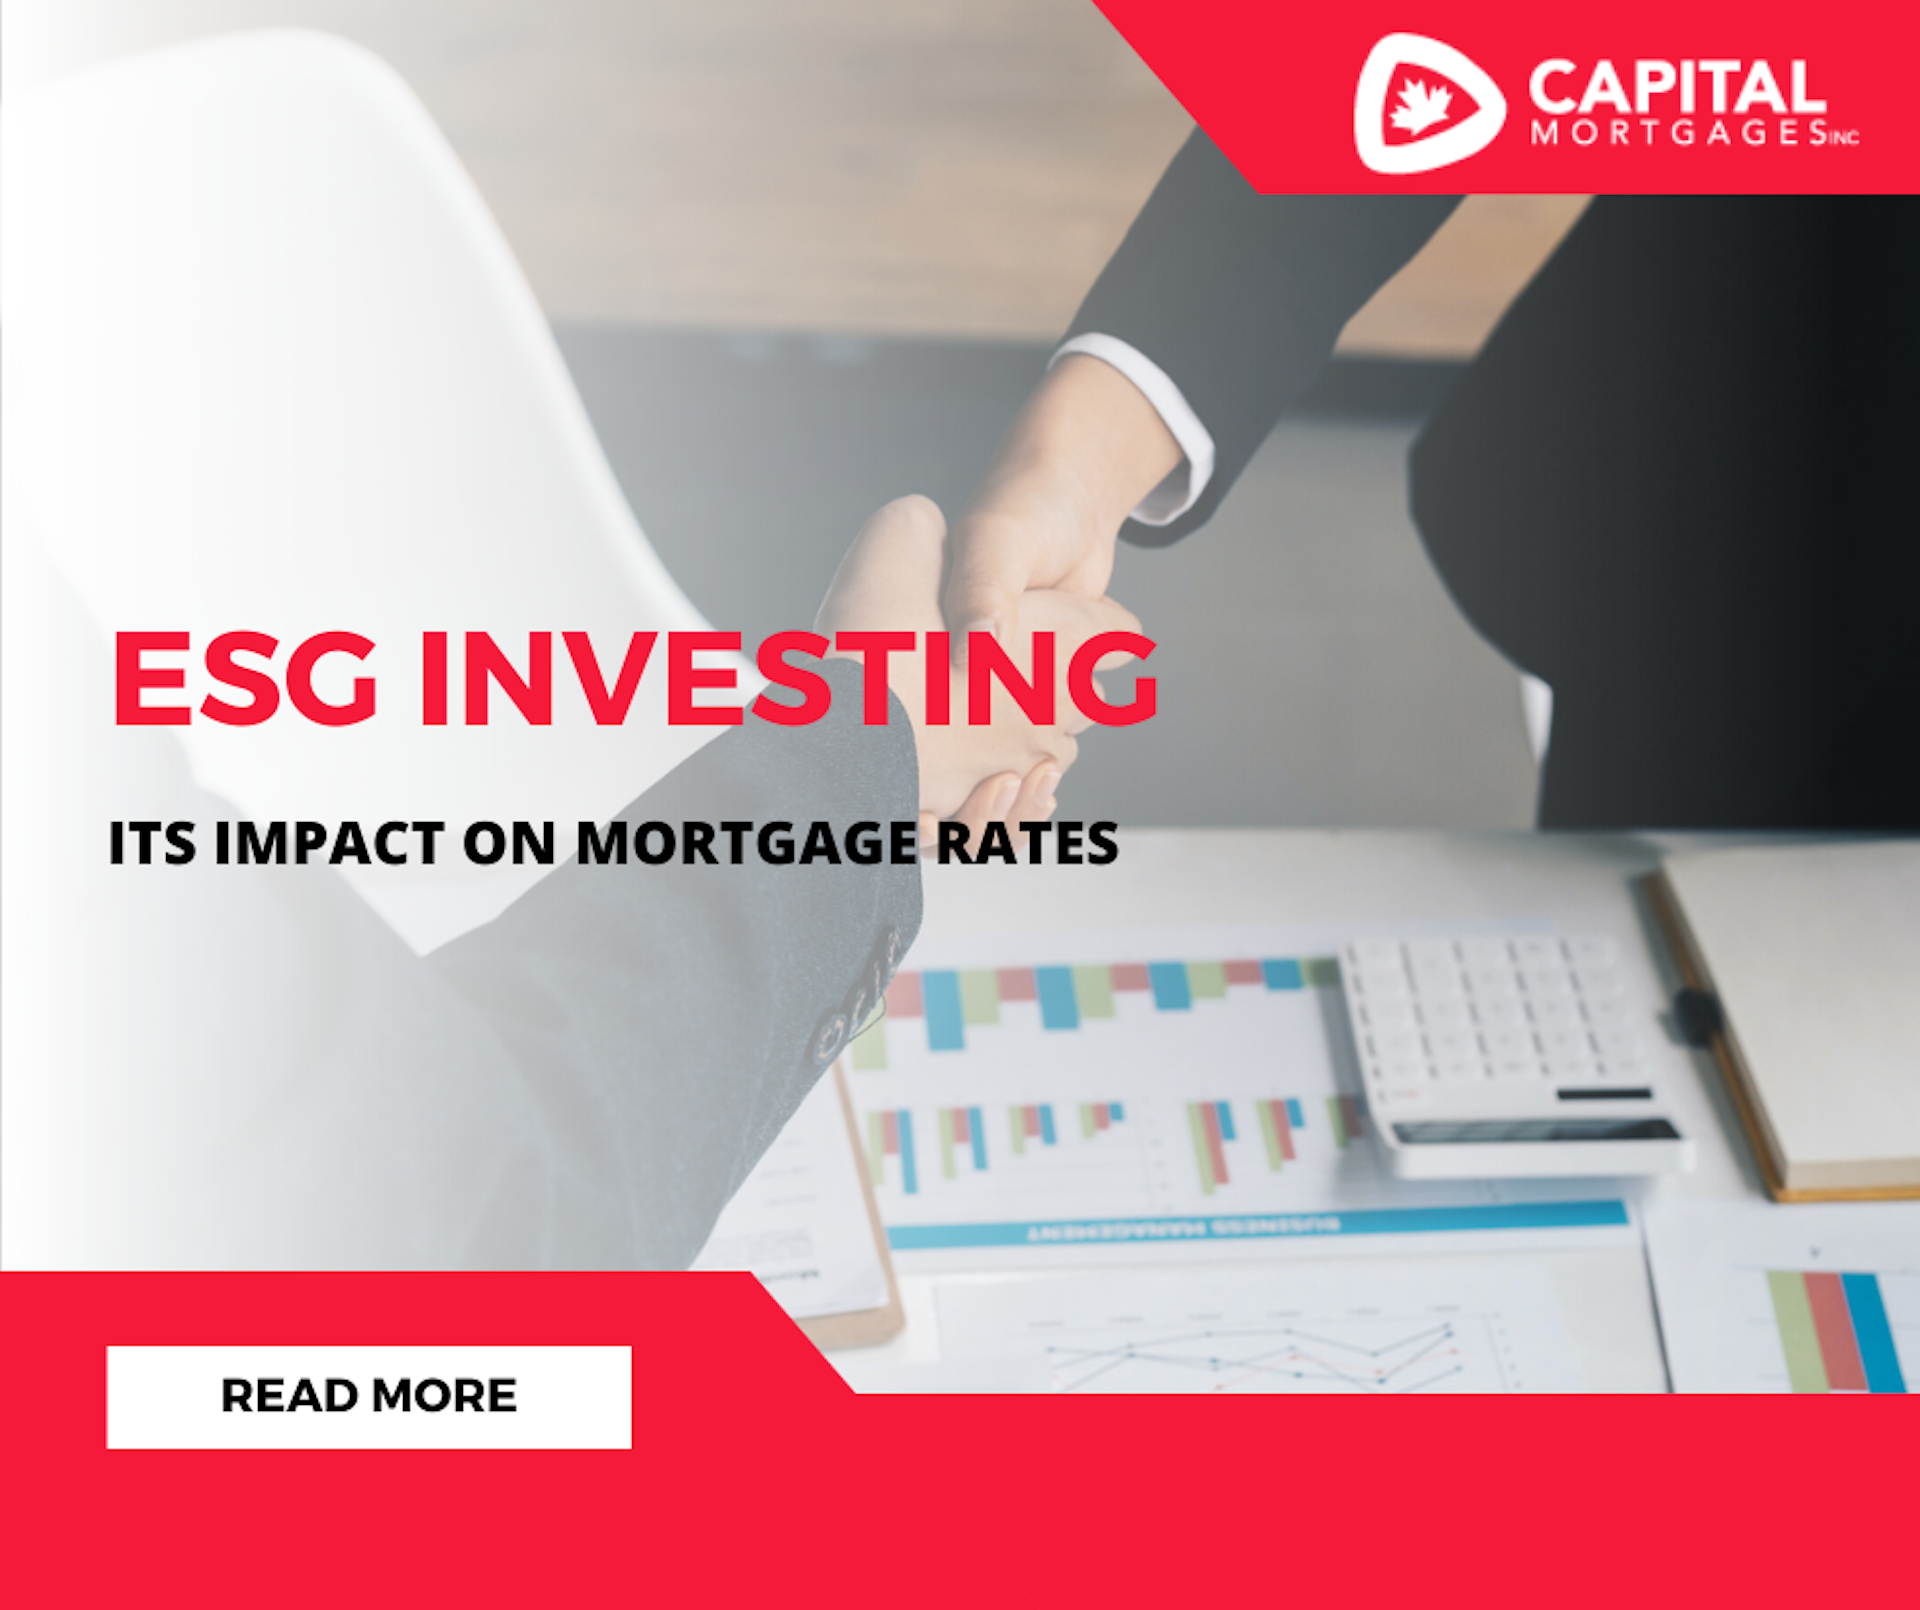 The Impact of ESG Investing on Mortgage Rates 